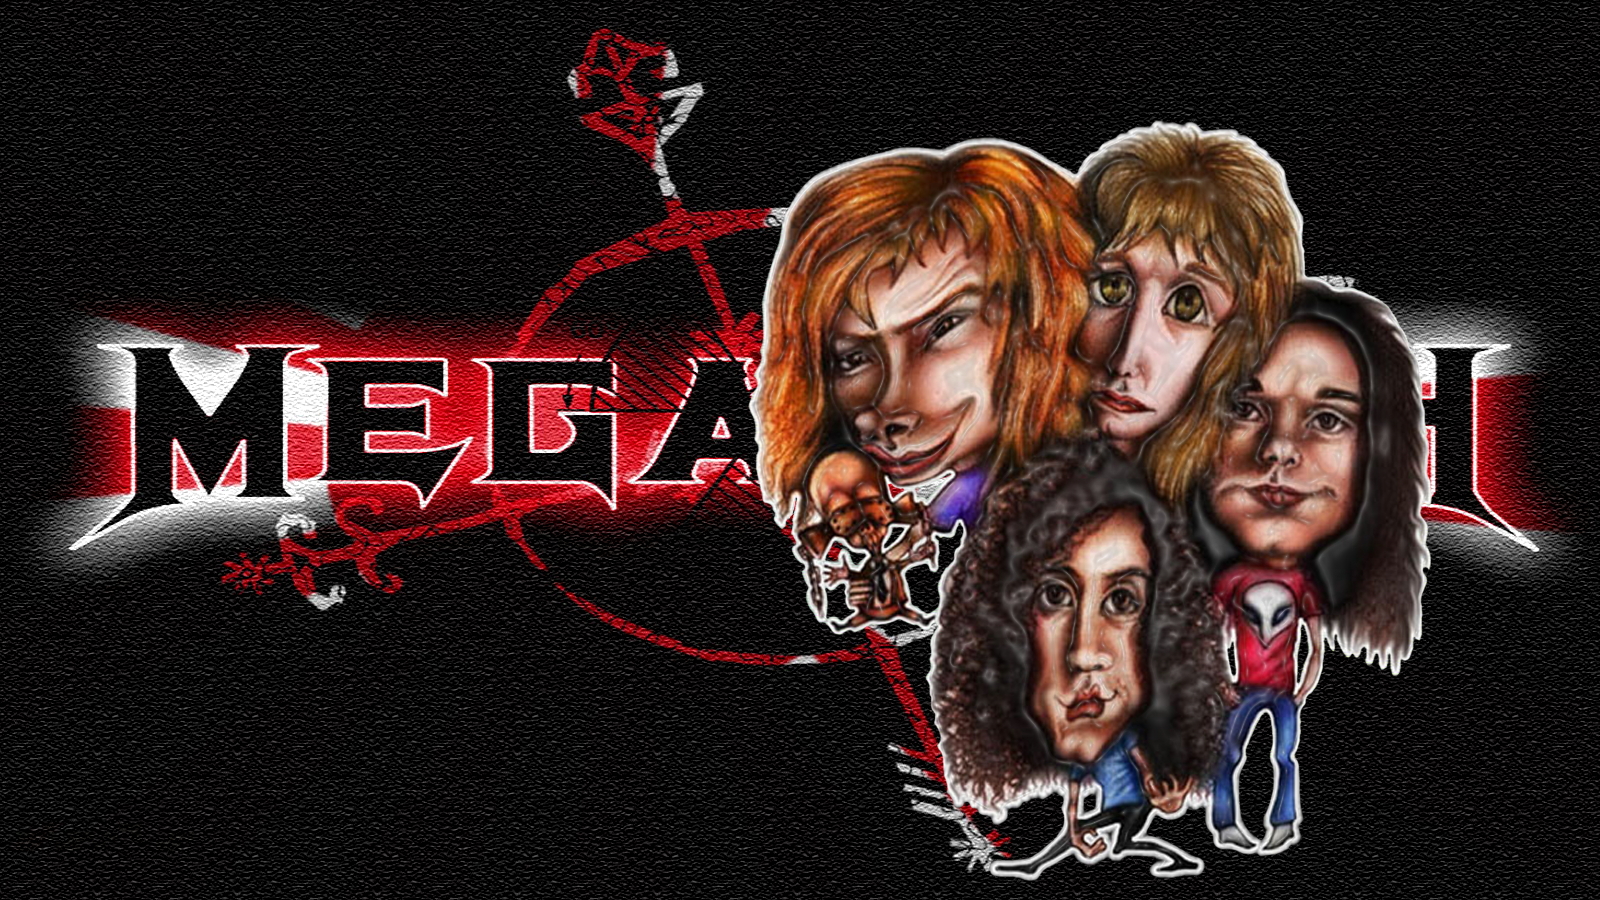 17 Megadeth HD Wallpapers Backgrounds - Wallpaper Abyss